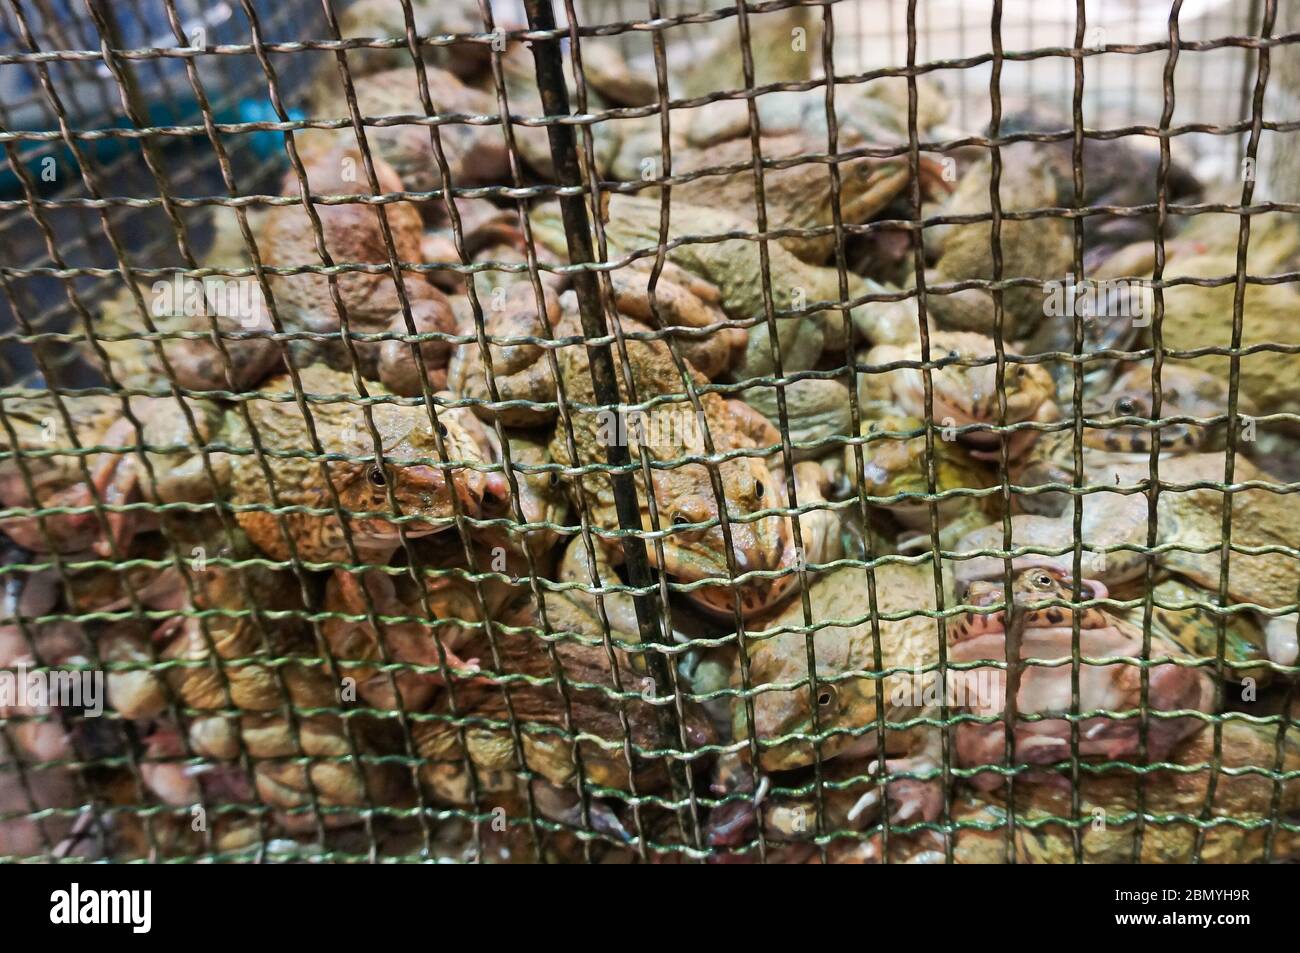 Live East Asian bullfrogs or Taiwanese frogs in a cage for sale as delicacies in a wildlife market in China. Stock Photo